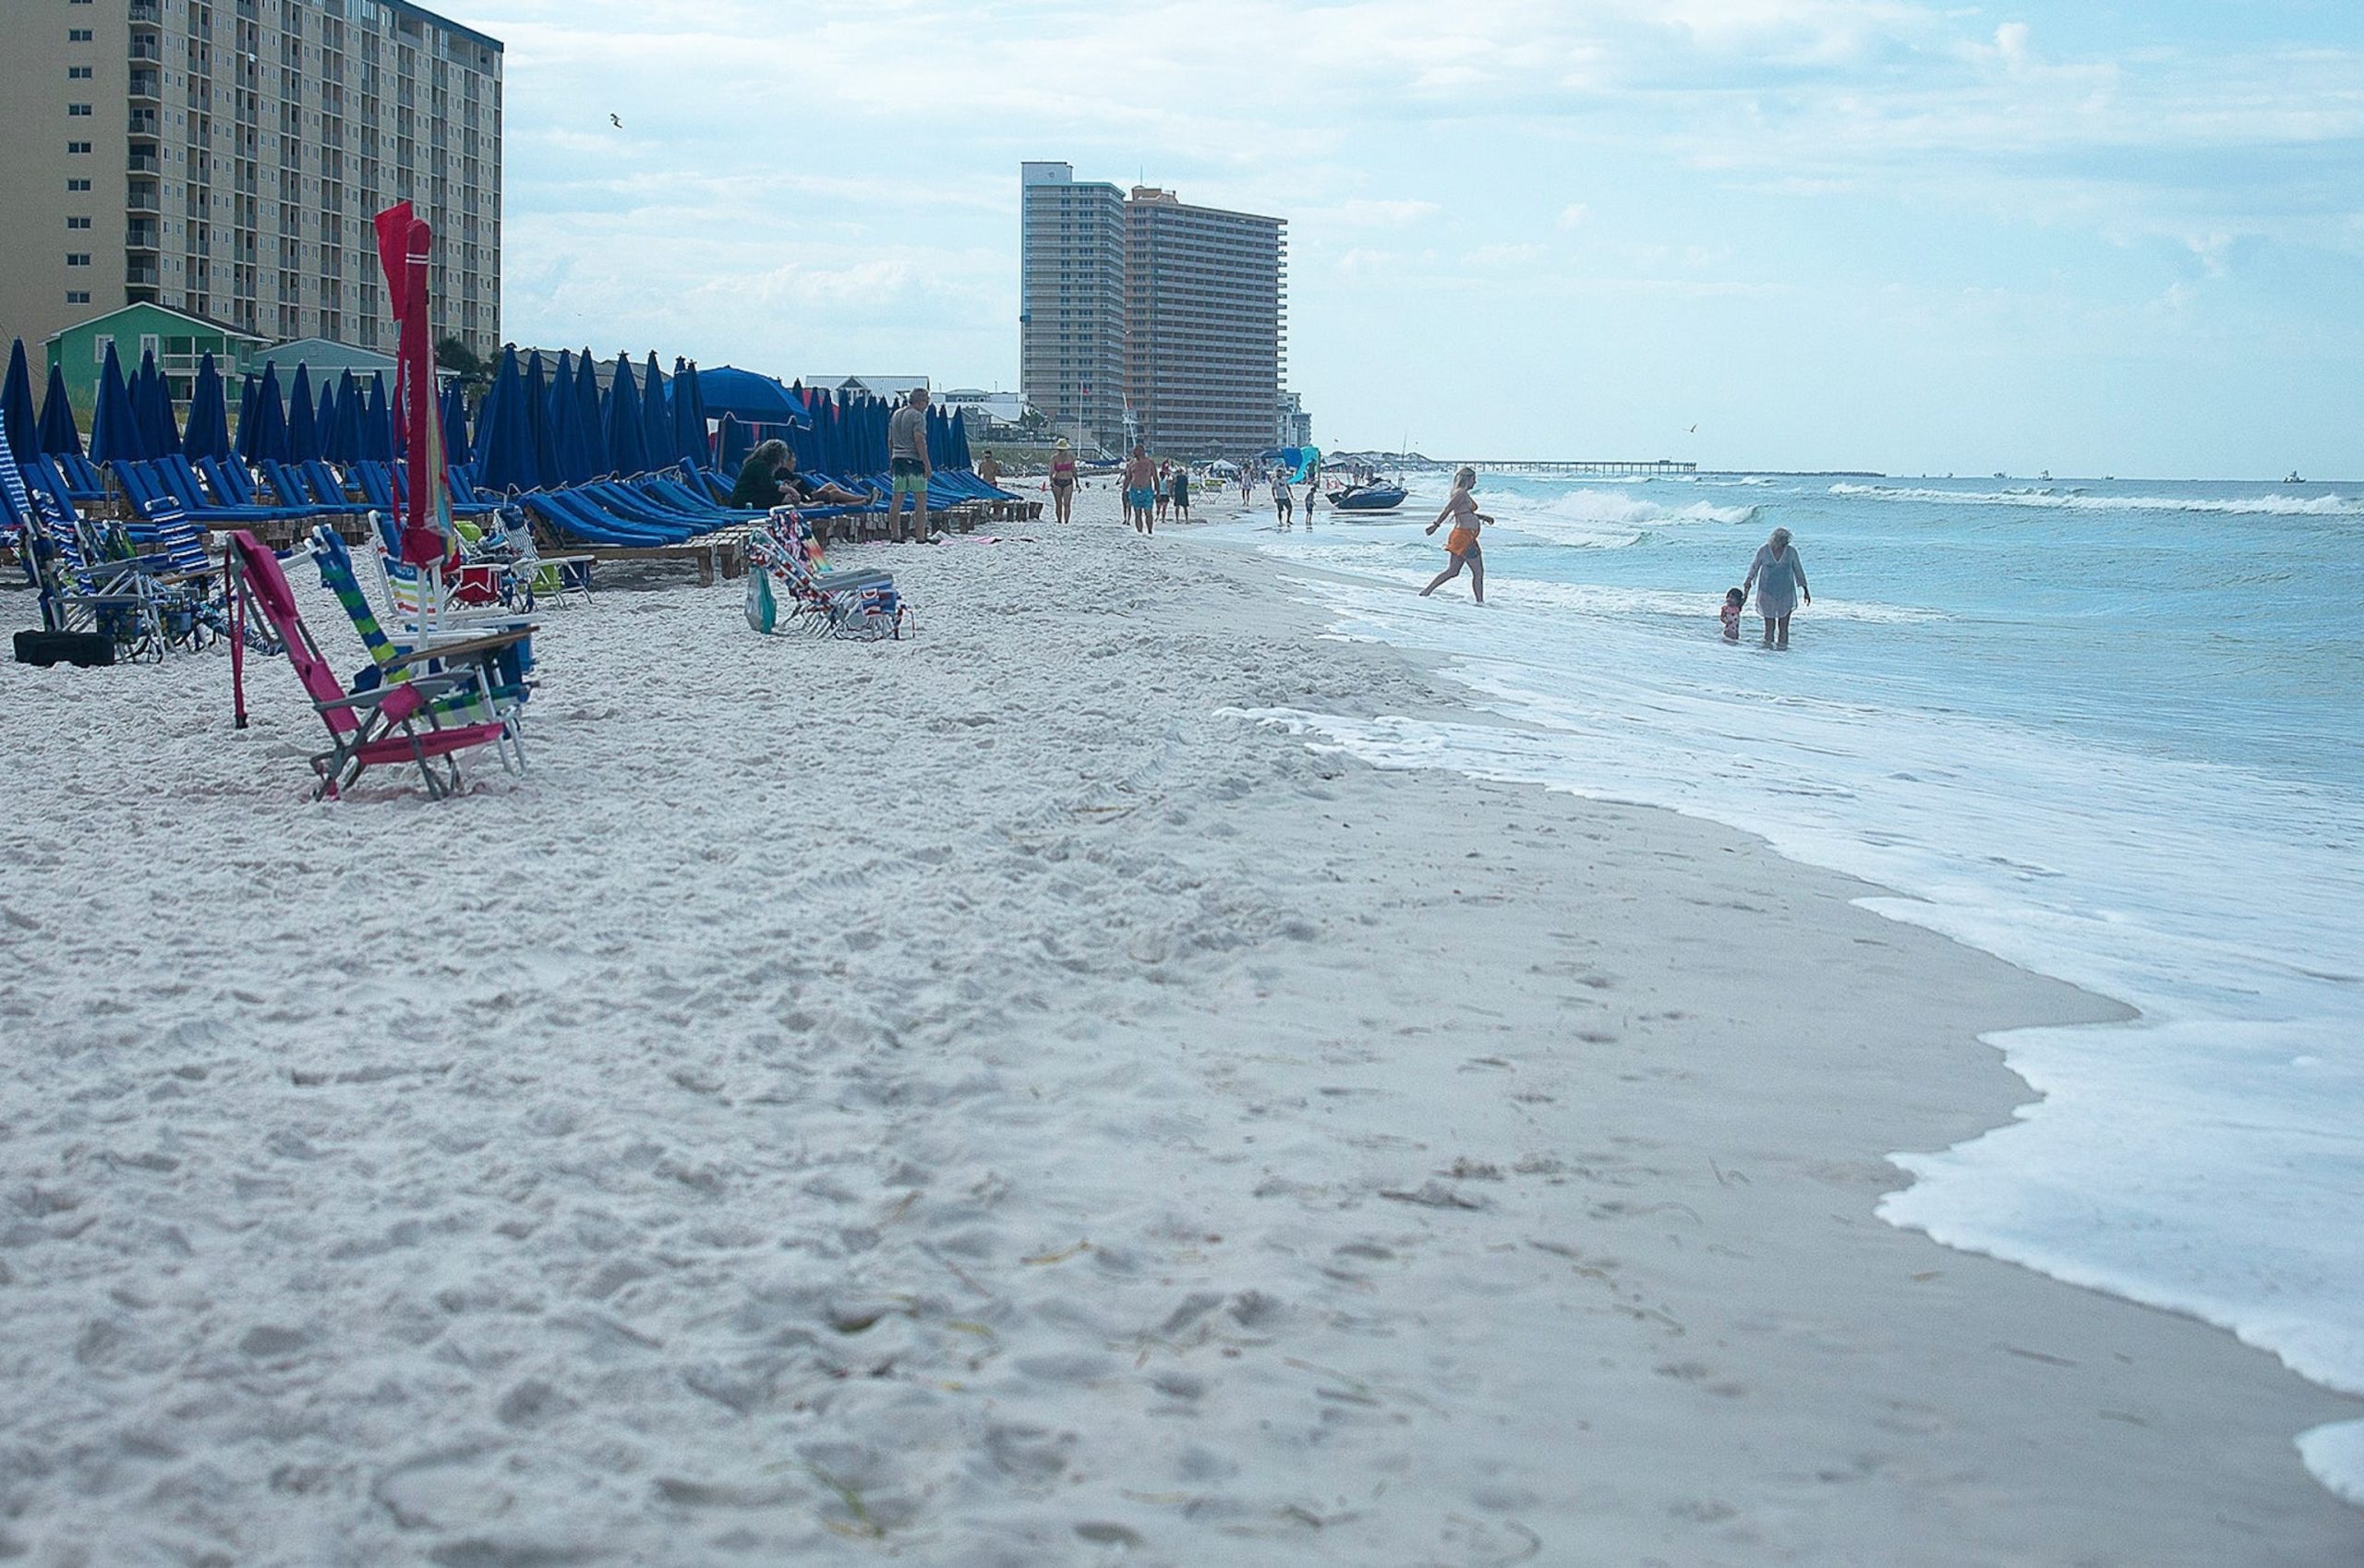 Police report that 3 young men drowned while swimming in Gulf Coast off Florida shores